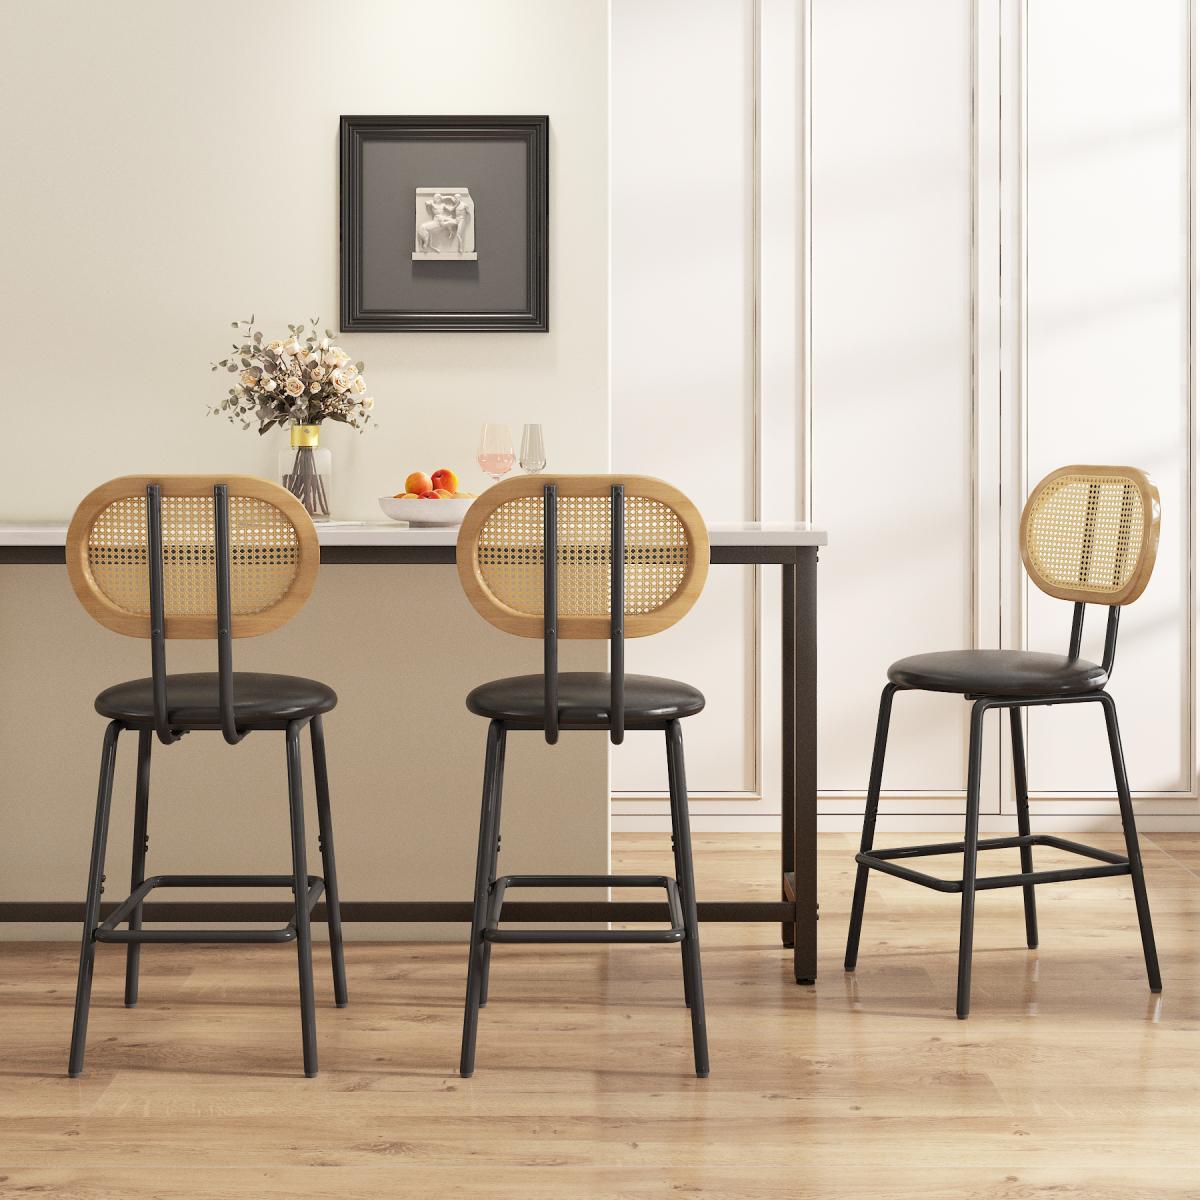 Rattan Bar Stool, Indoor Leather Bar Stools Set of 2, Counter Height Bar Stools with Metal Leg & Rattan Backrest, Armless Dining Room Chairs for Kitchens Island